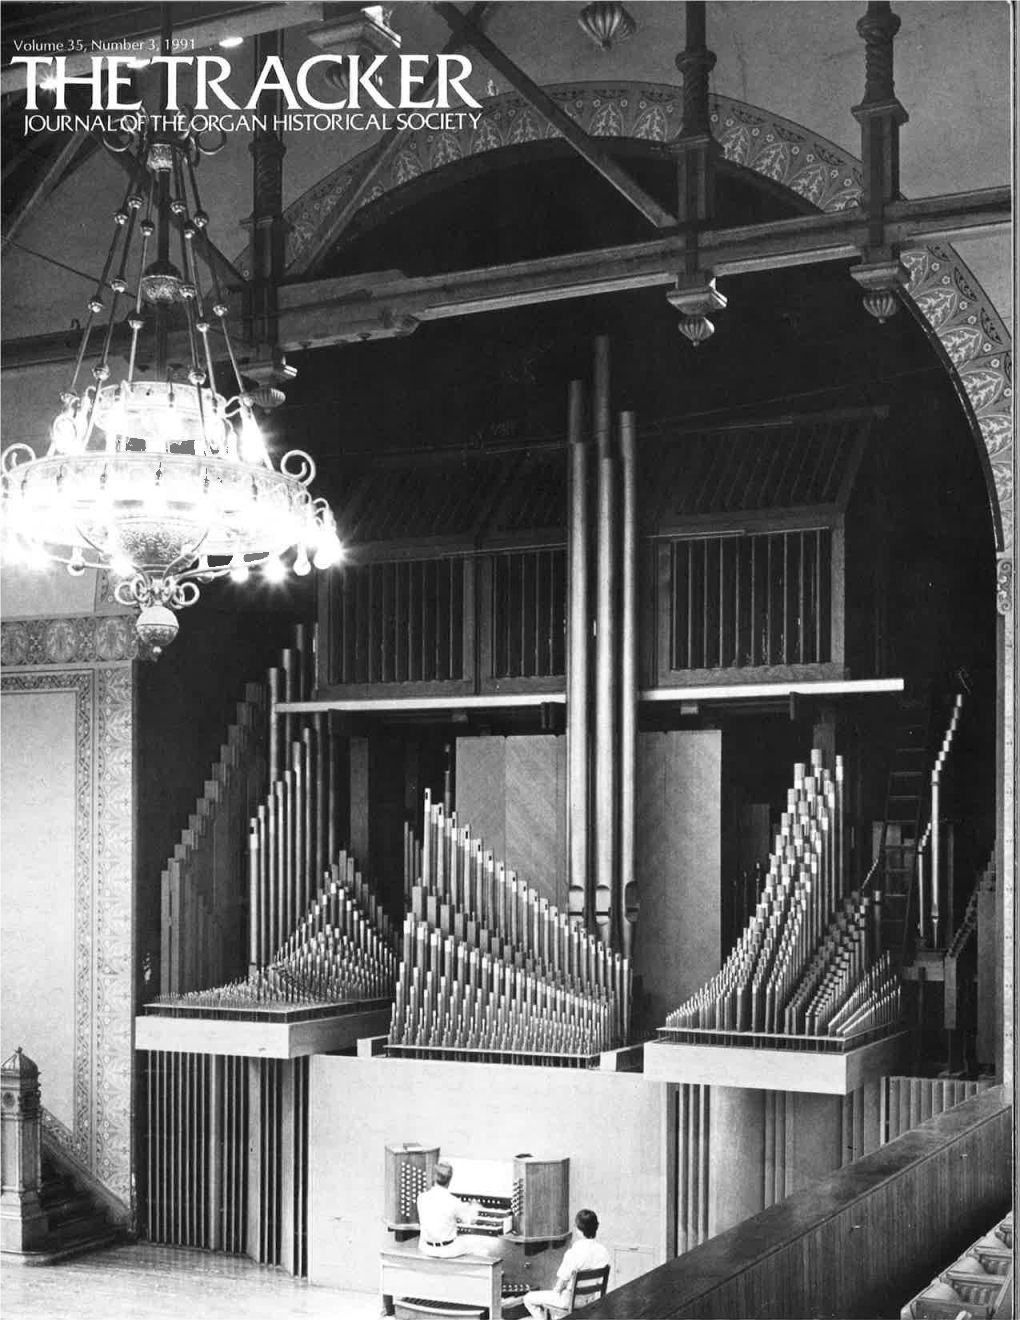 CHURCH ORGANS Been Restored by Thomas-Pierce, Ltd., of a Guide to Selection & Purchase Palm Beach, FL, and Installed in the Music Room of Thomas R